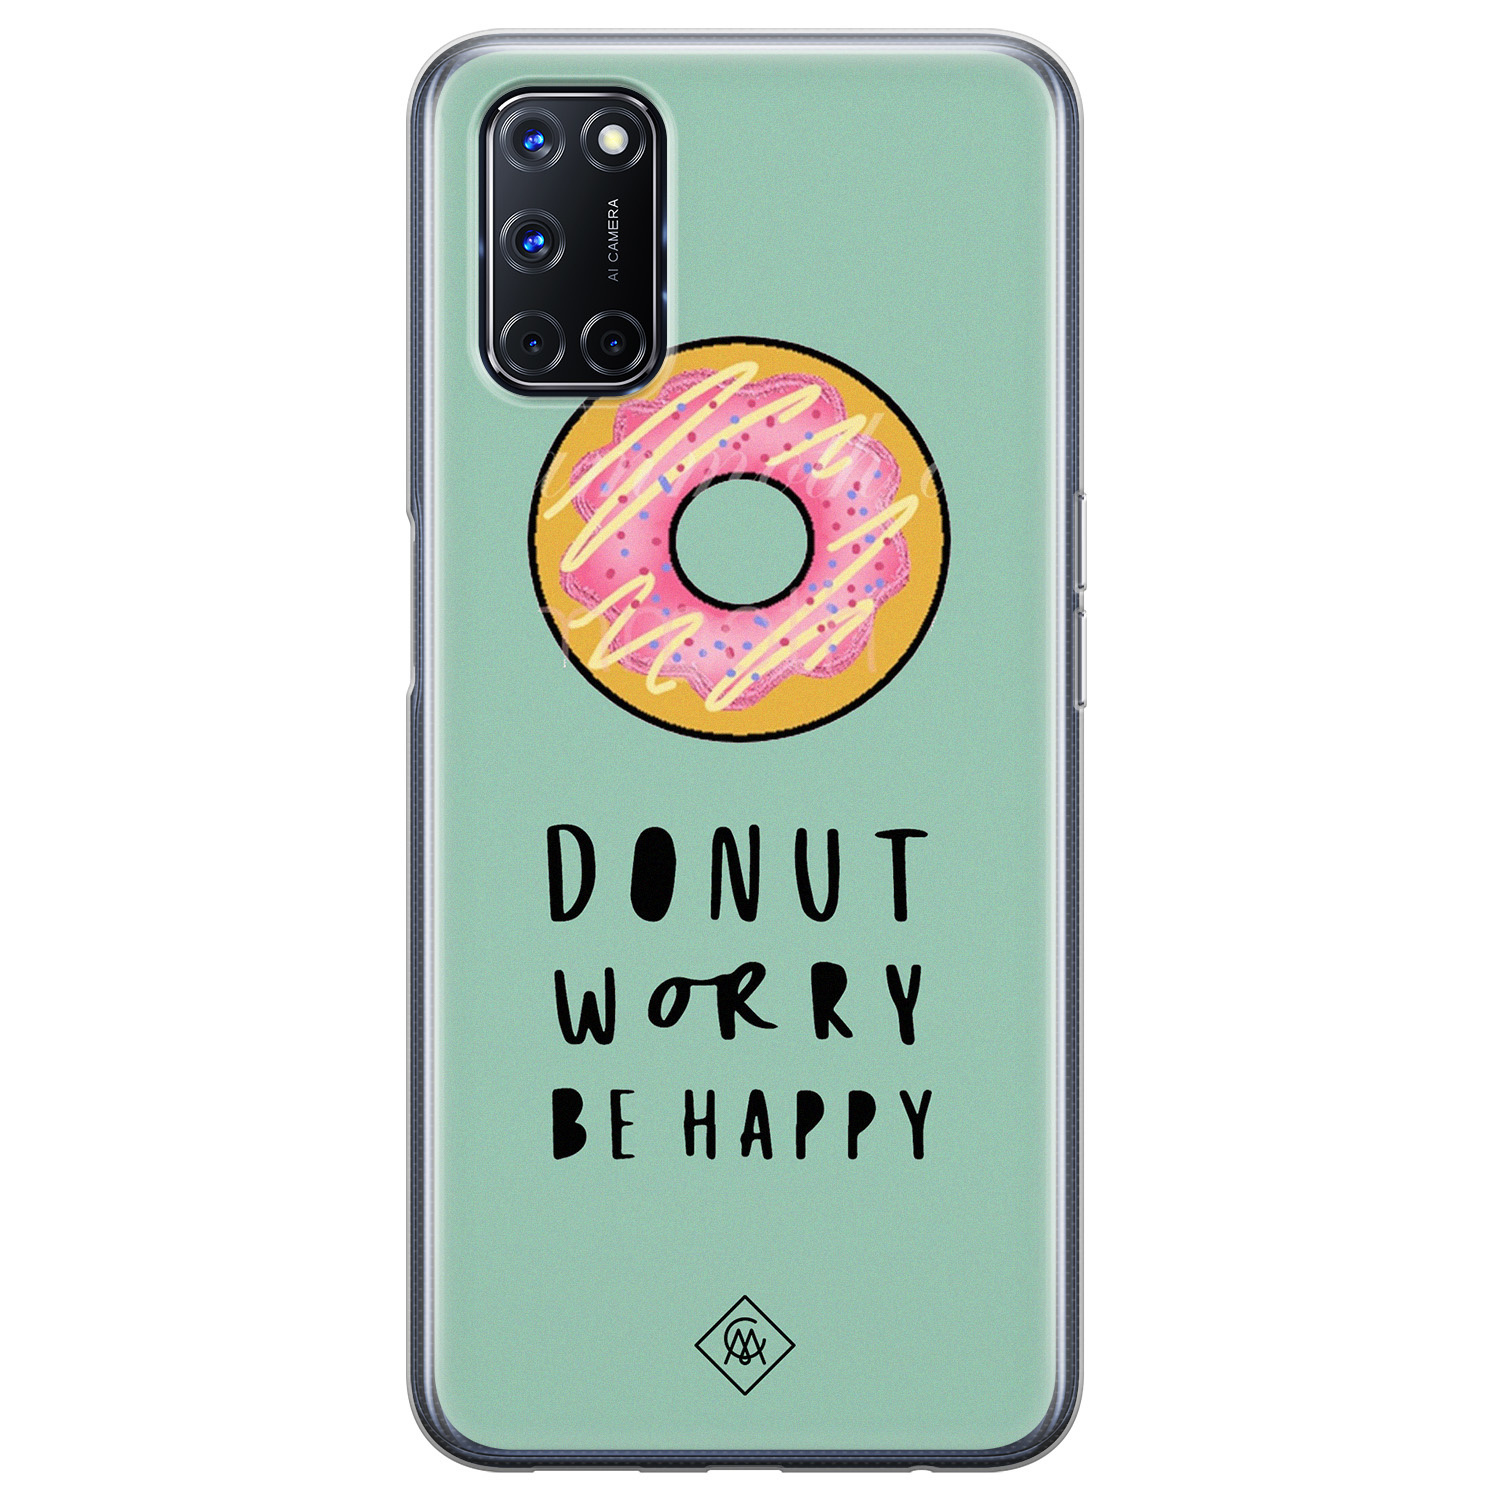 Oppo A92 siliconen hoesje - Donut worry